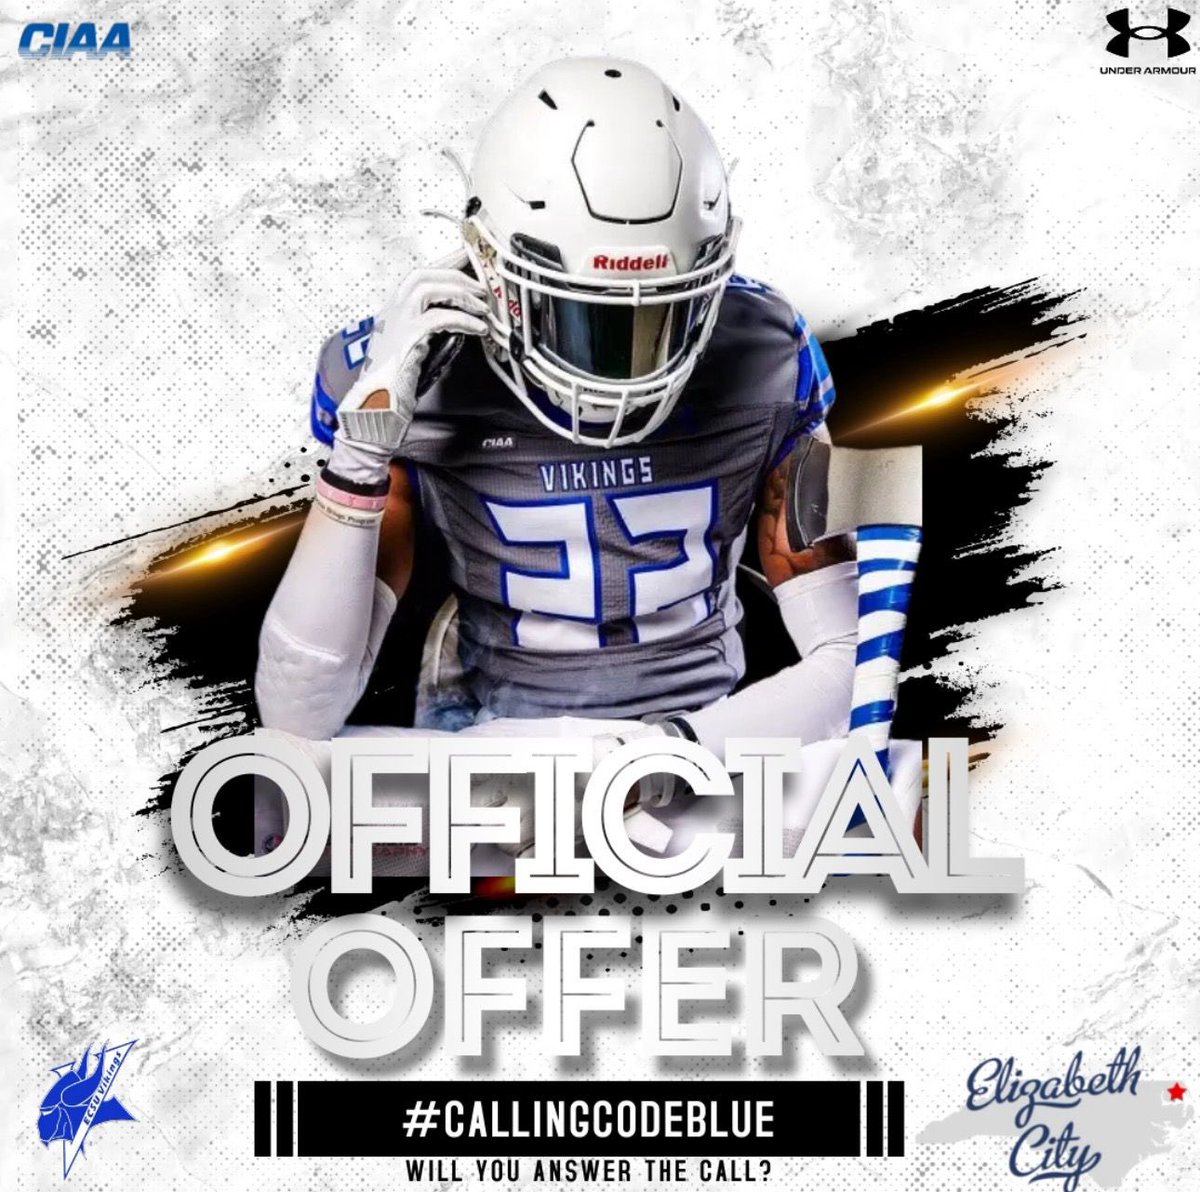 Blessed to receive an offer from ECSU!! @CoachDC22